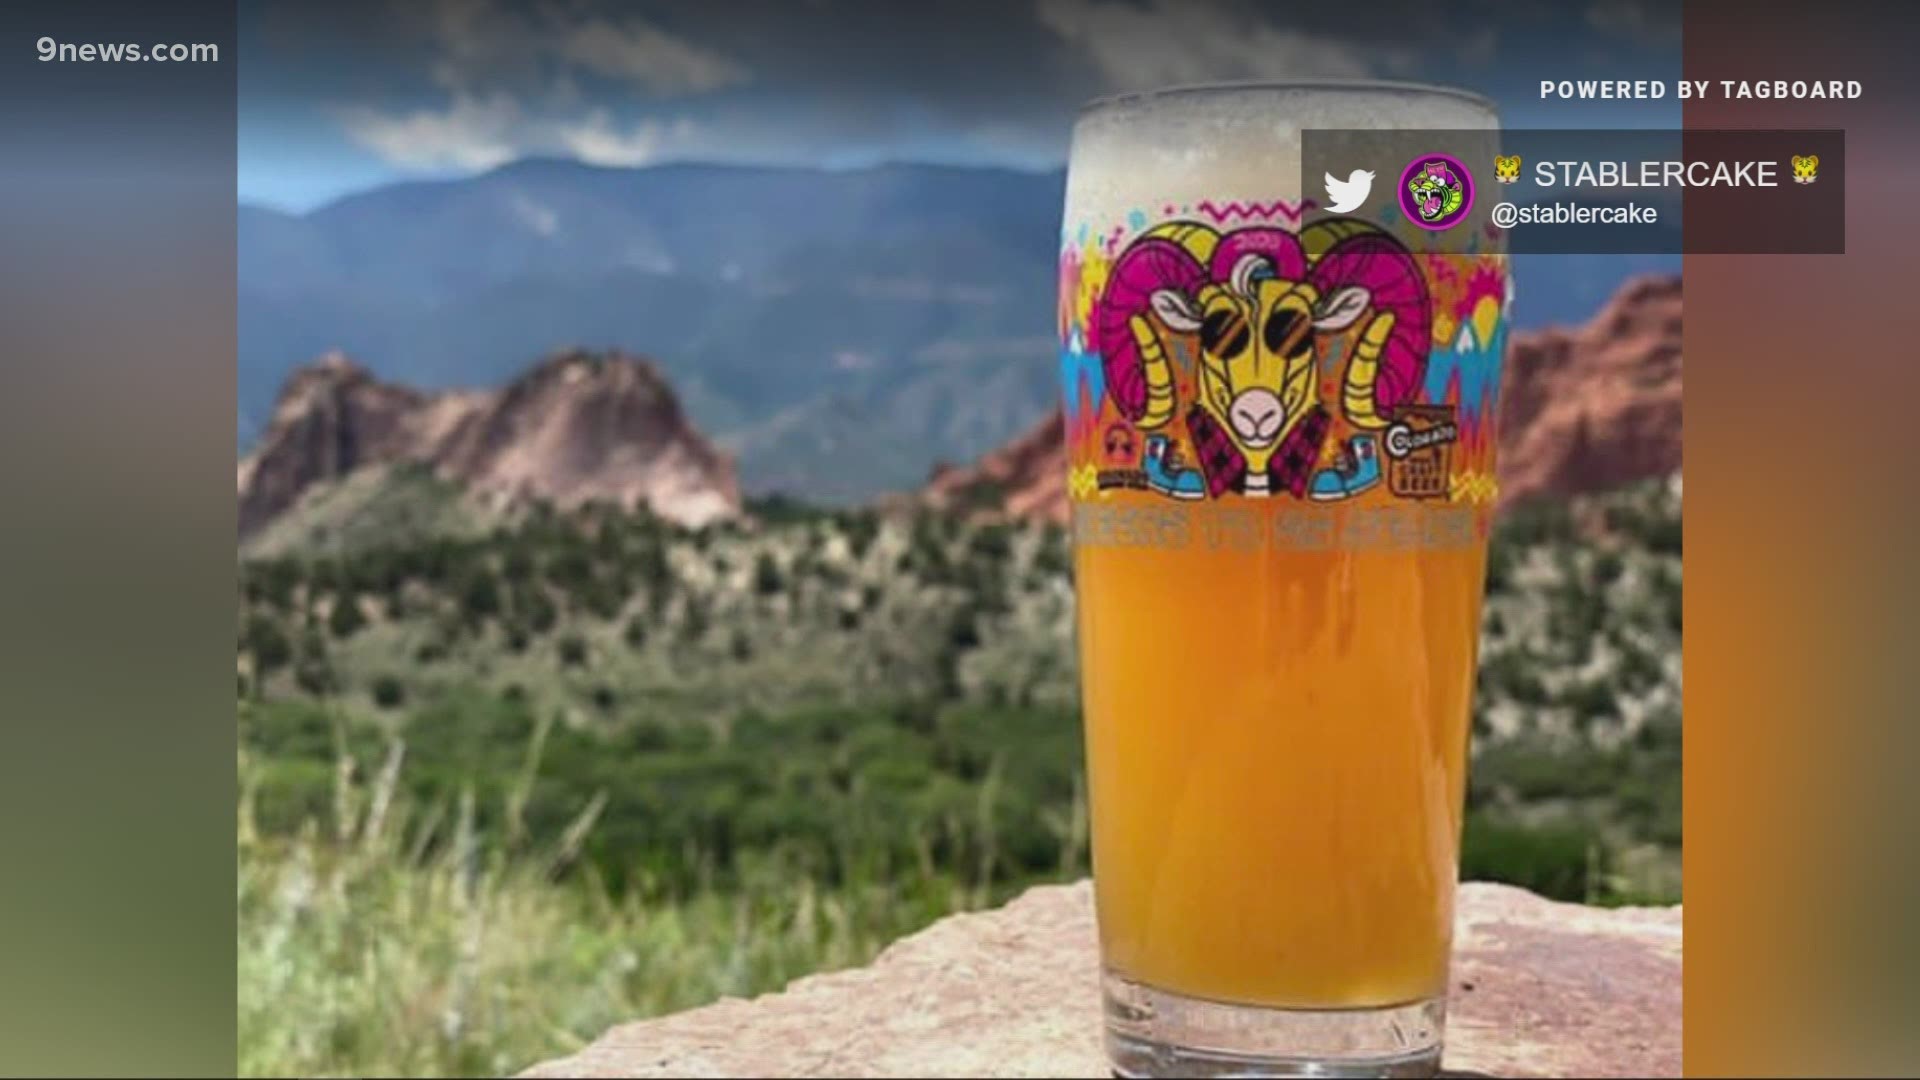 More than 100 breweries across Colorado will participate in the 5th annual Colorado Pint Day 2020 on Wednesday, July 29.